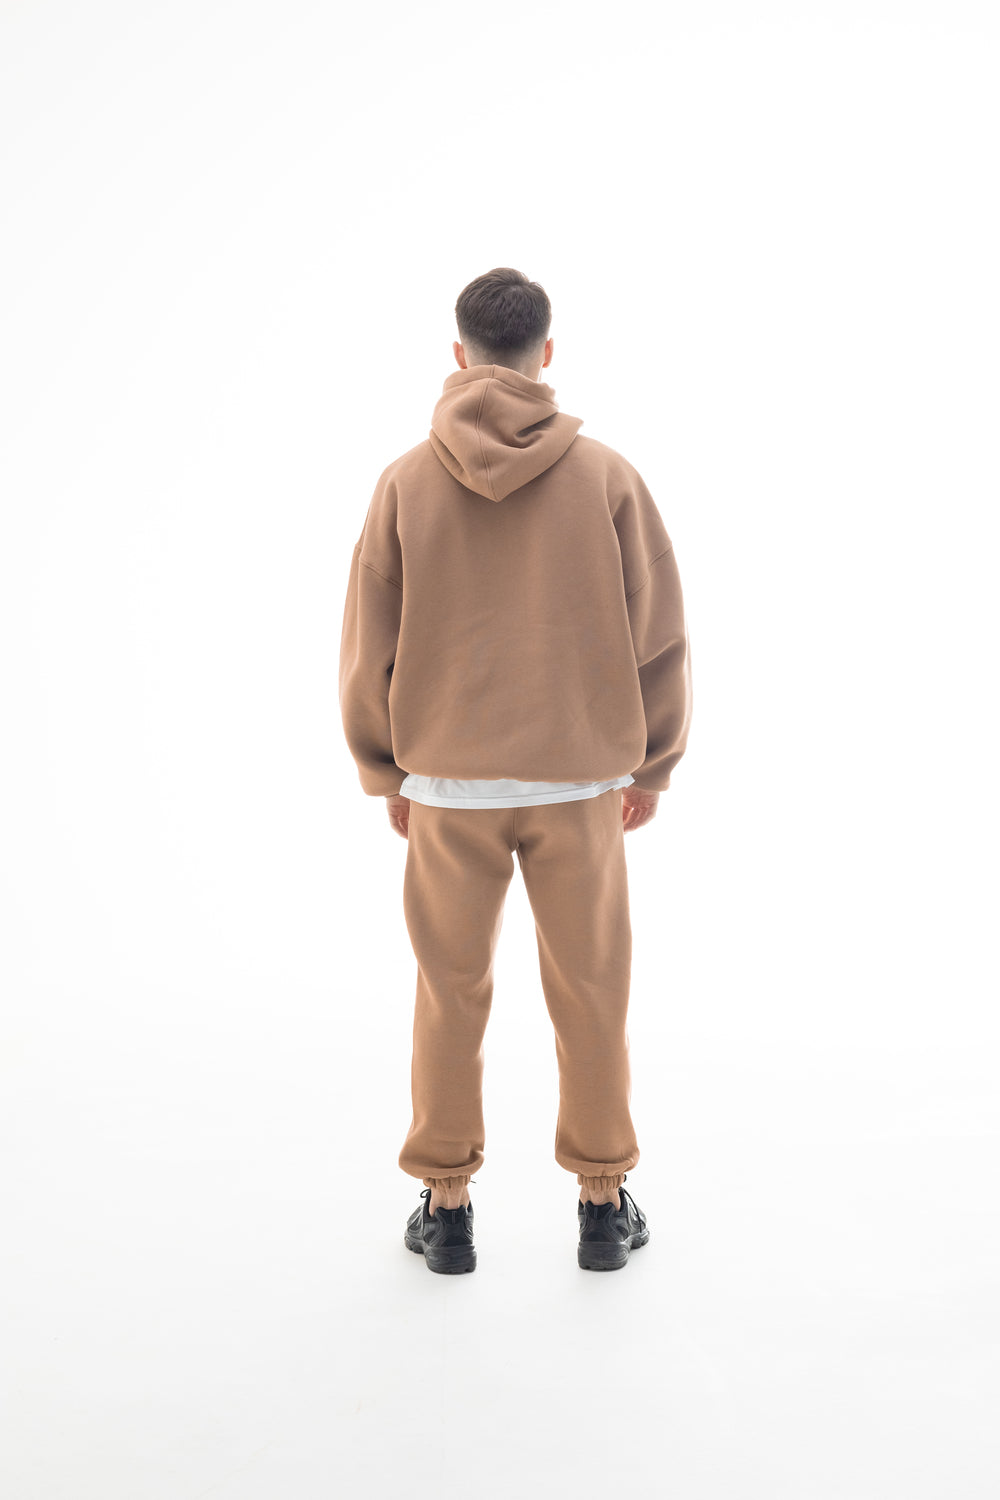 JOGGERS OVERSIZED ULTRA BROWN - Morning Star